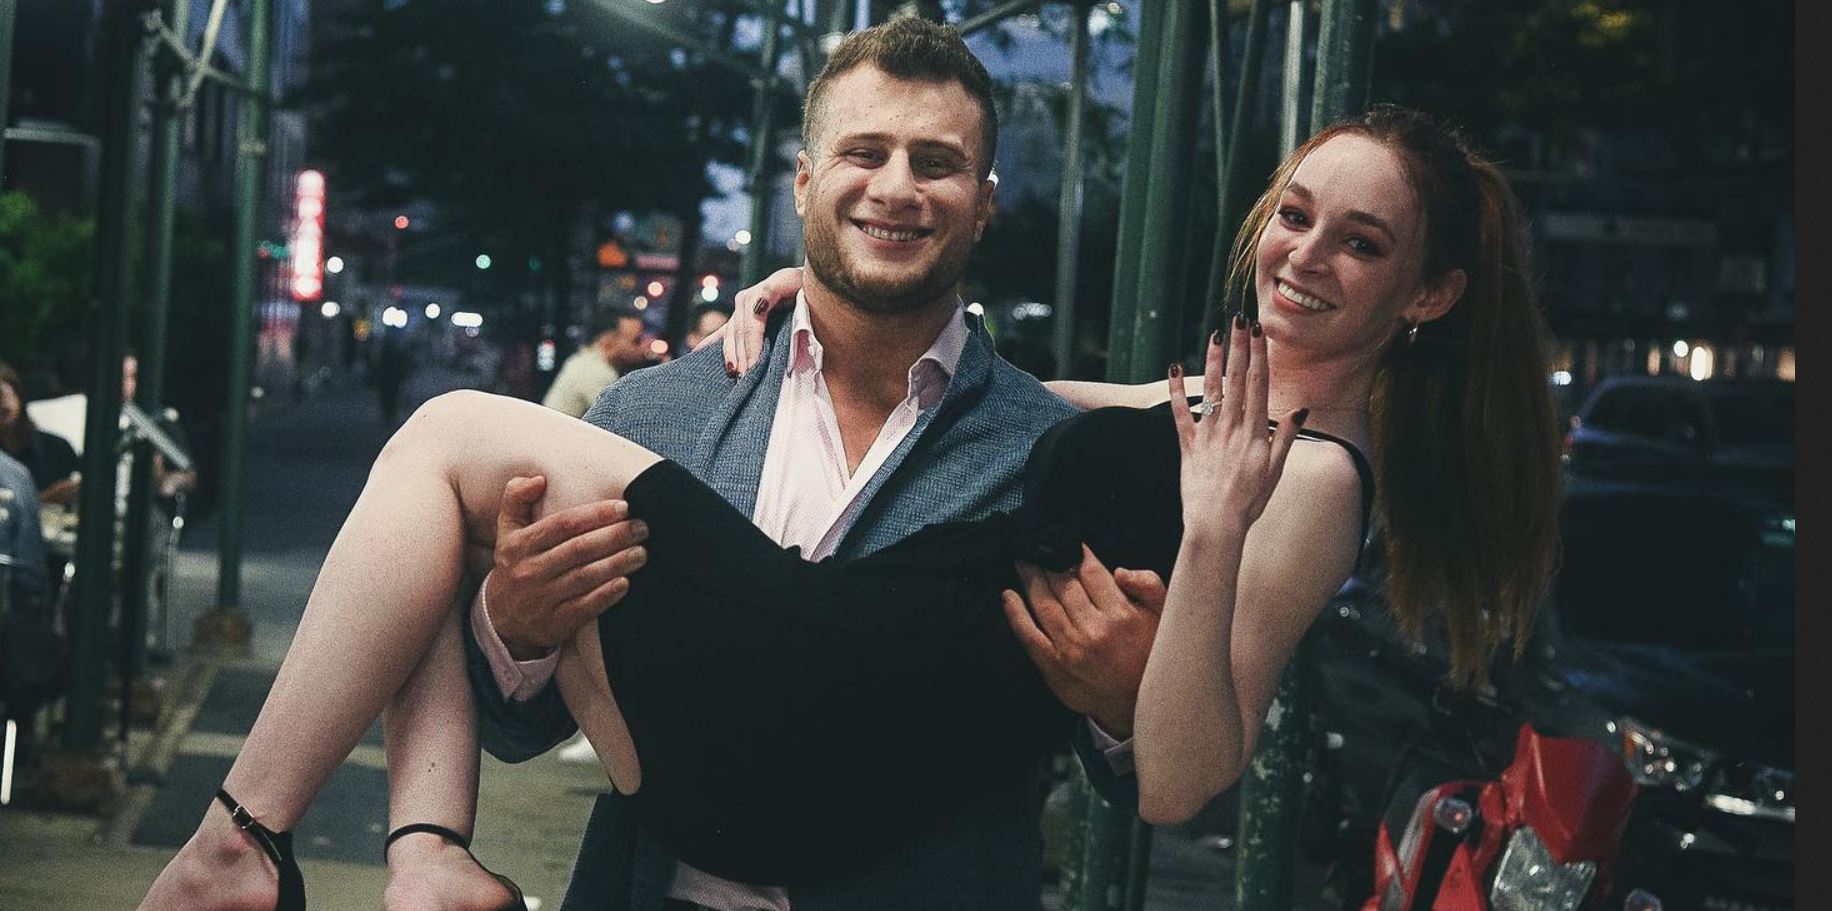 MJF Messages “Panicking Ladies” After He And Fiance Announce Their Engagement